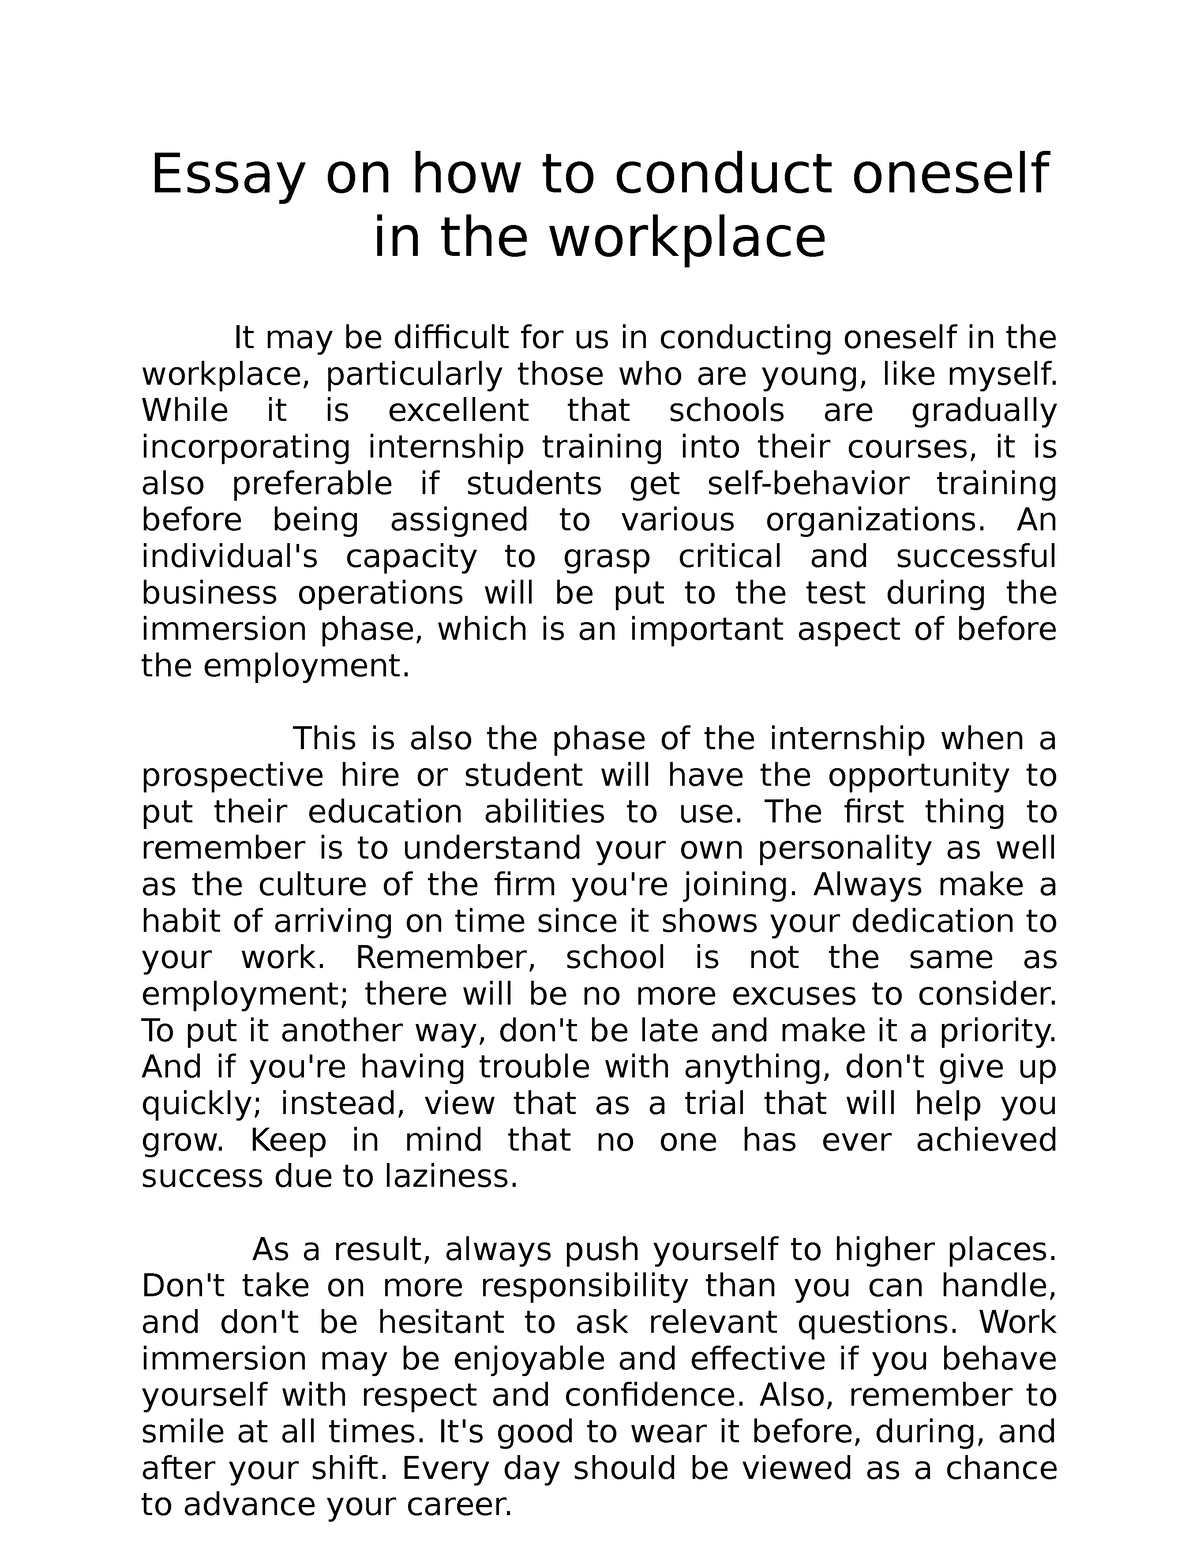 how to conduct oneself during work immersion essay brainly